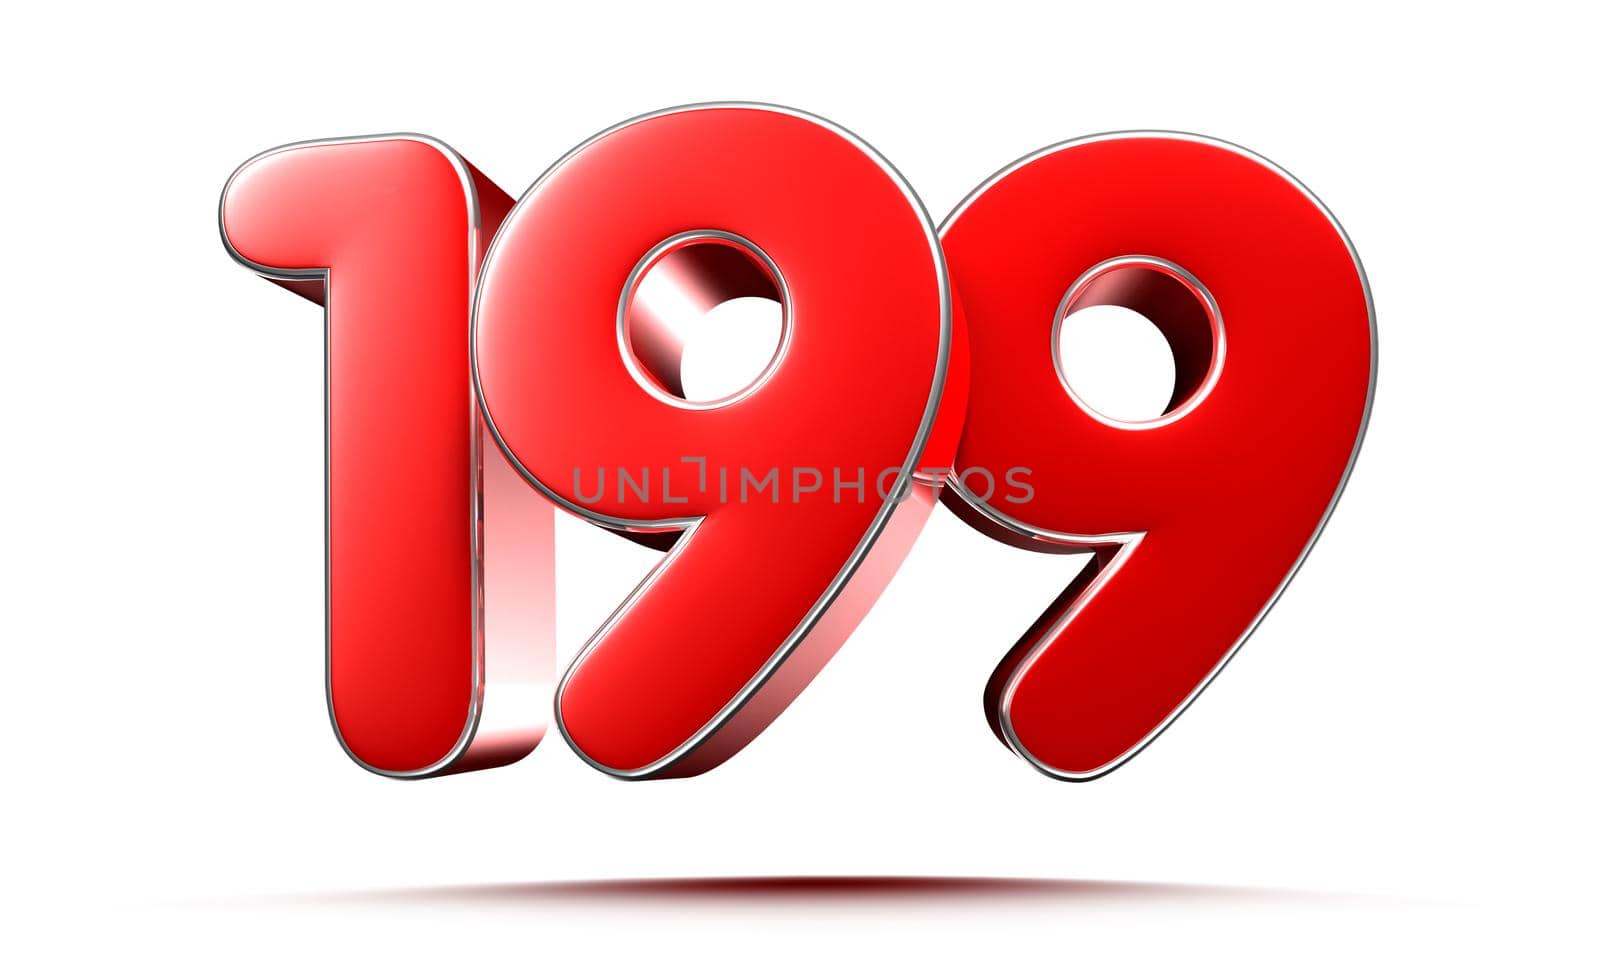 Rounded red numbers 199 on white background 3D illustration with clipping path